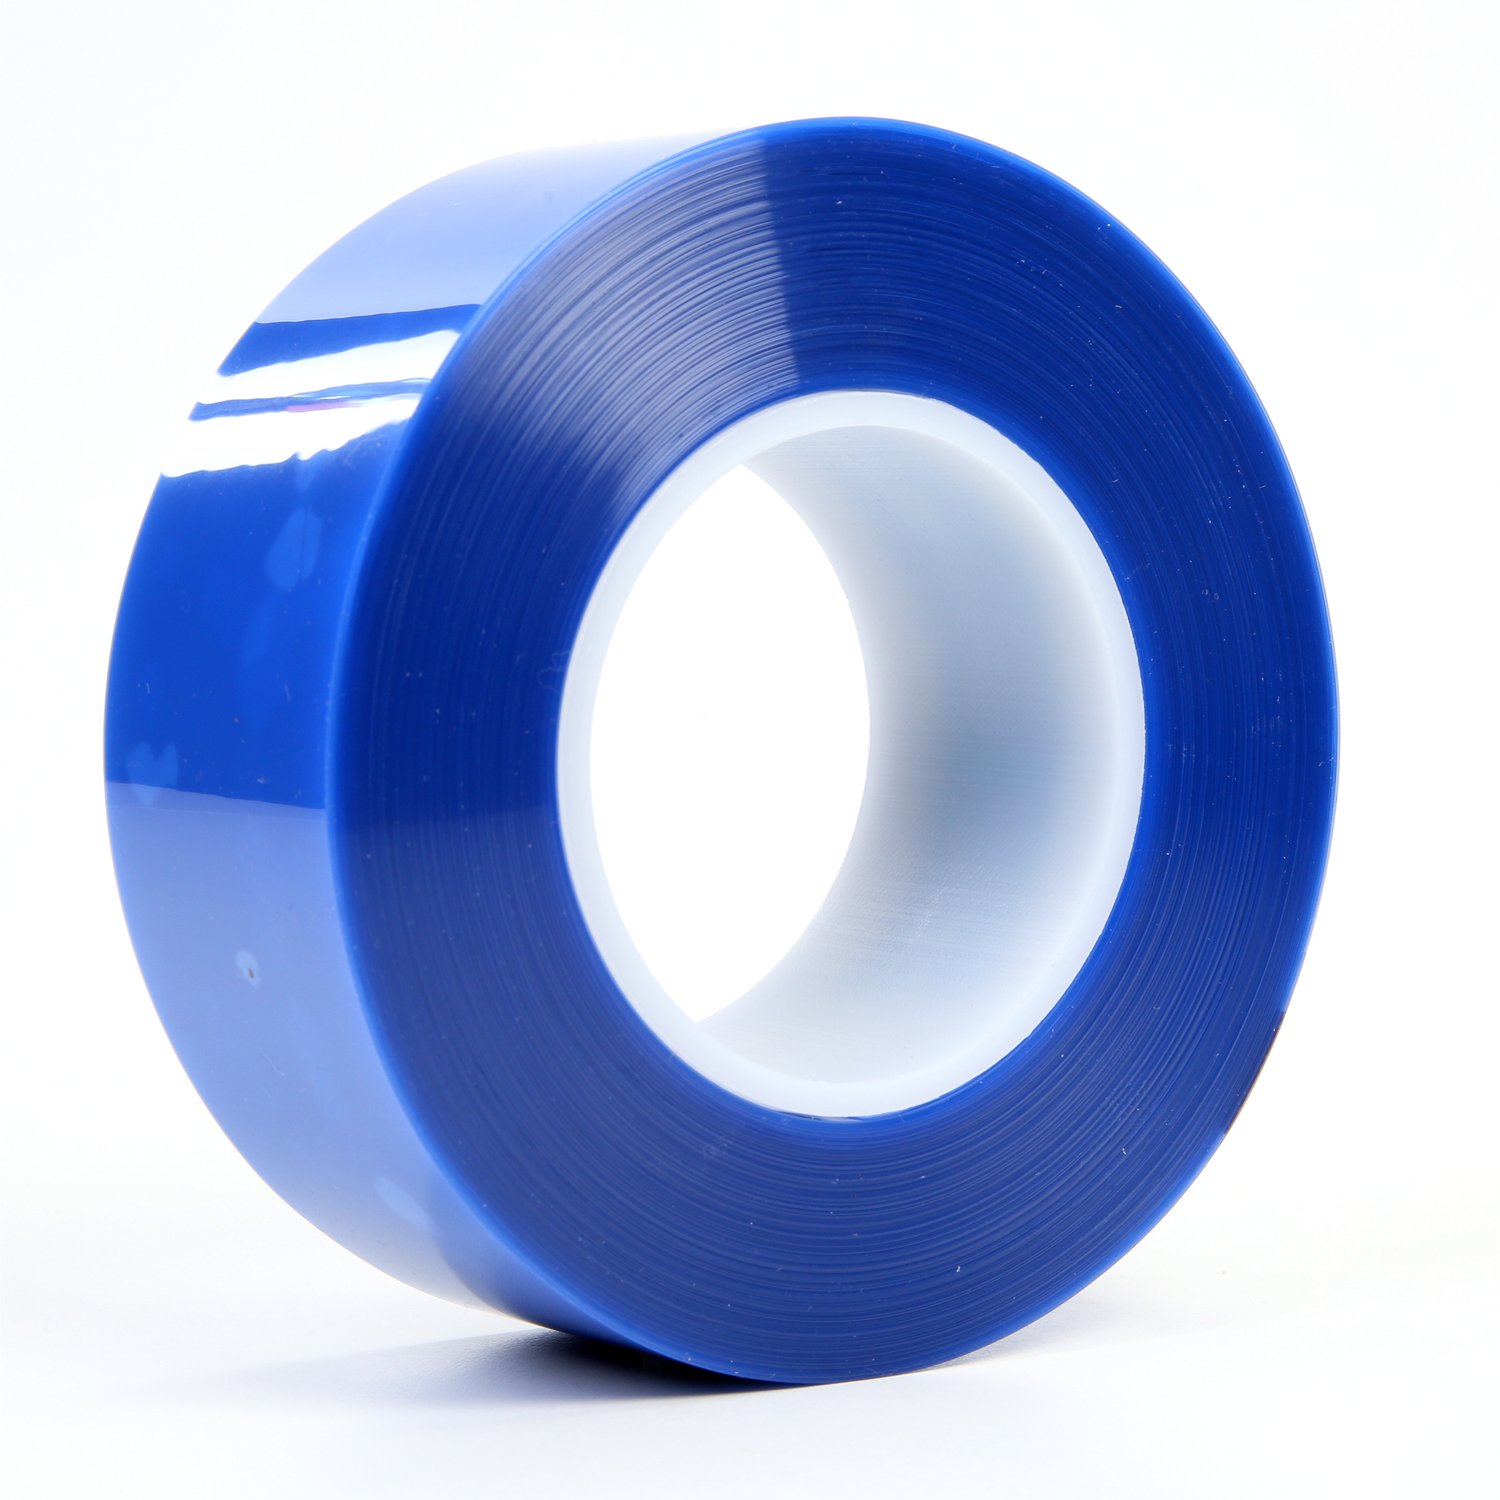 7000049604 - 3M Polyester Tape 8905, Blue, 2 in x 72 yd, 6.4 mil, 24 rolls per case